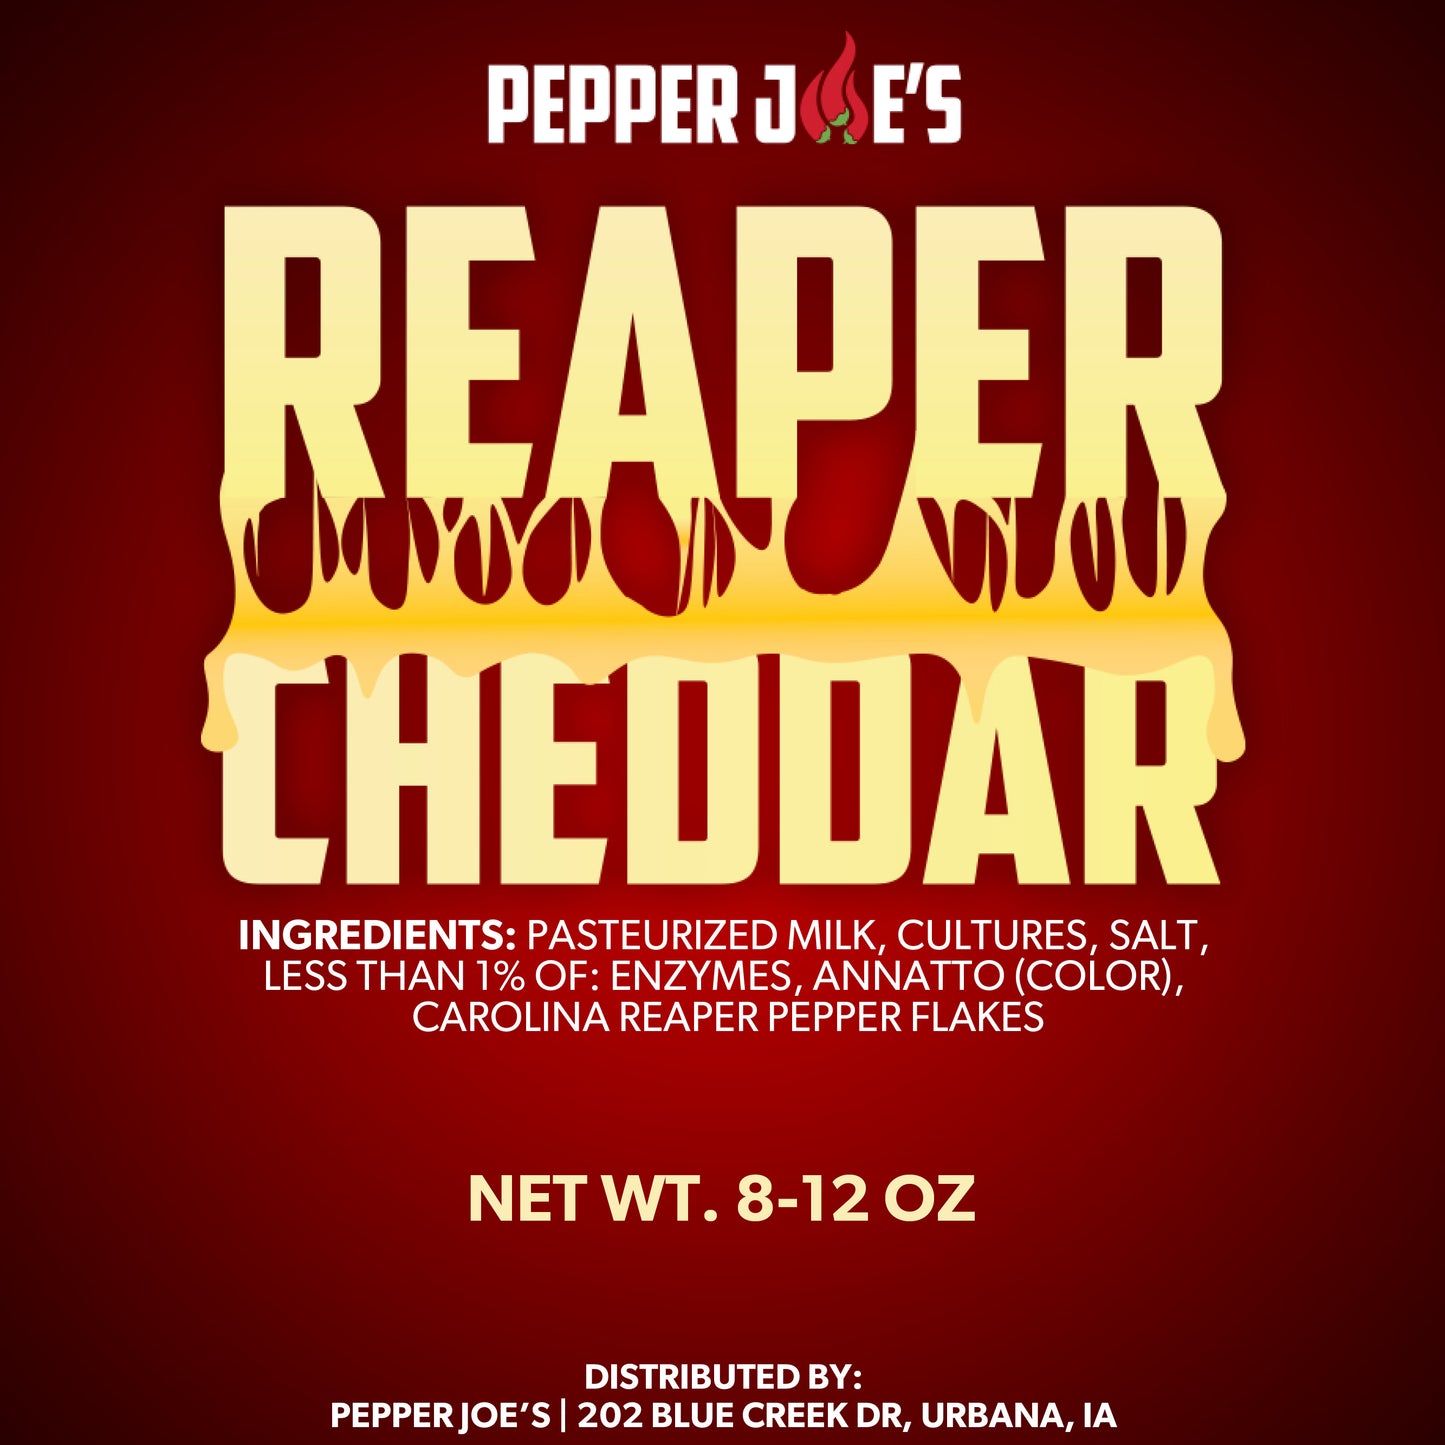 Pepper Joe's Carolina Reaper Cheddar Cheese - spicy cheese packaging label